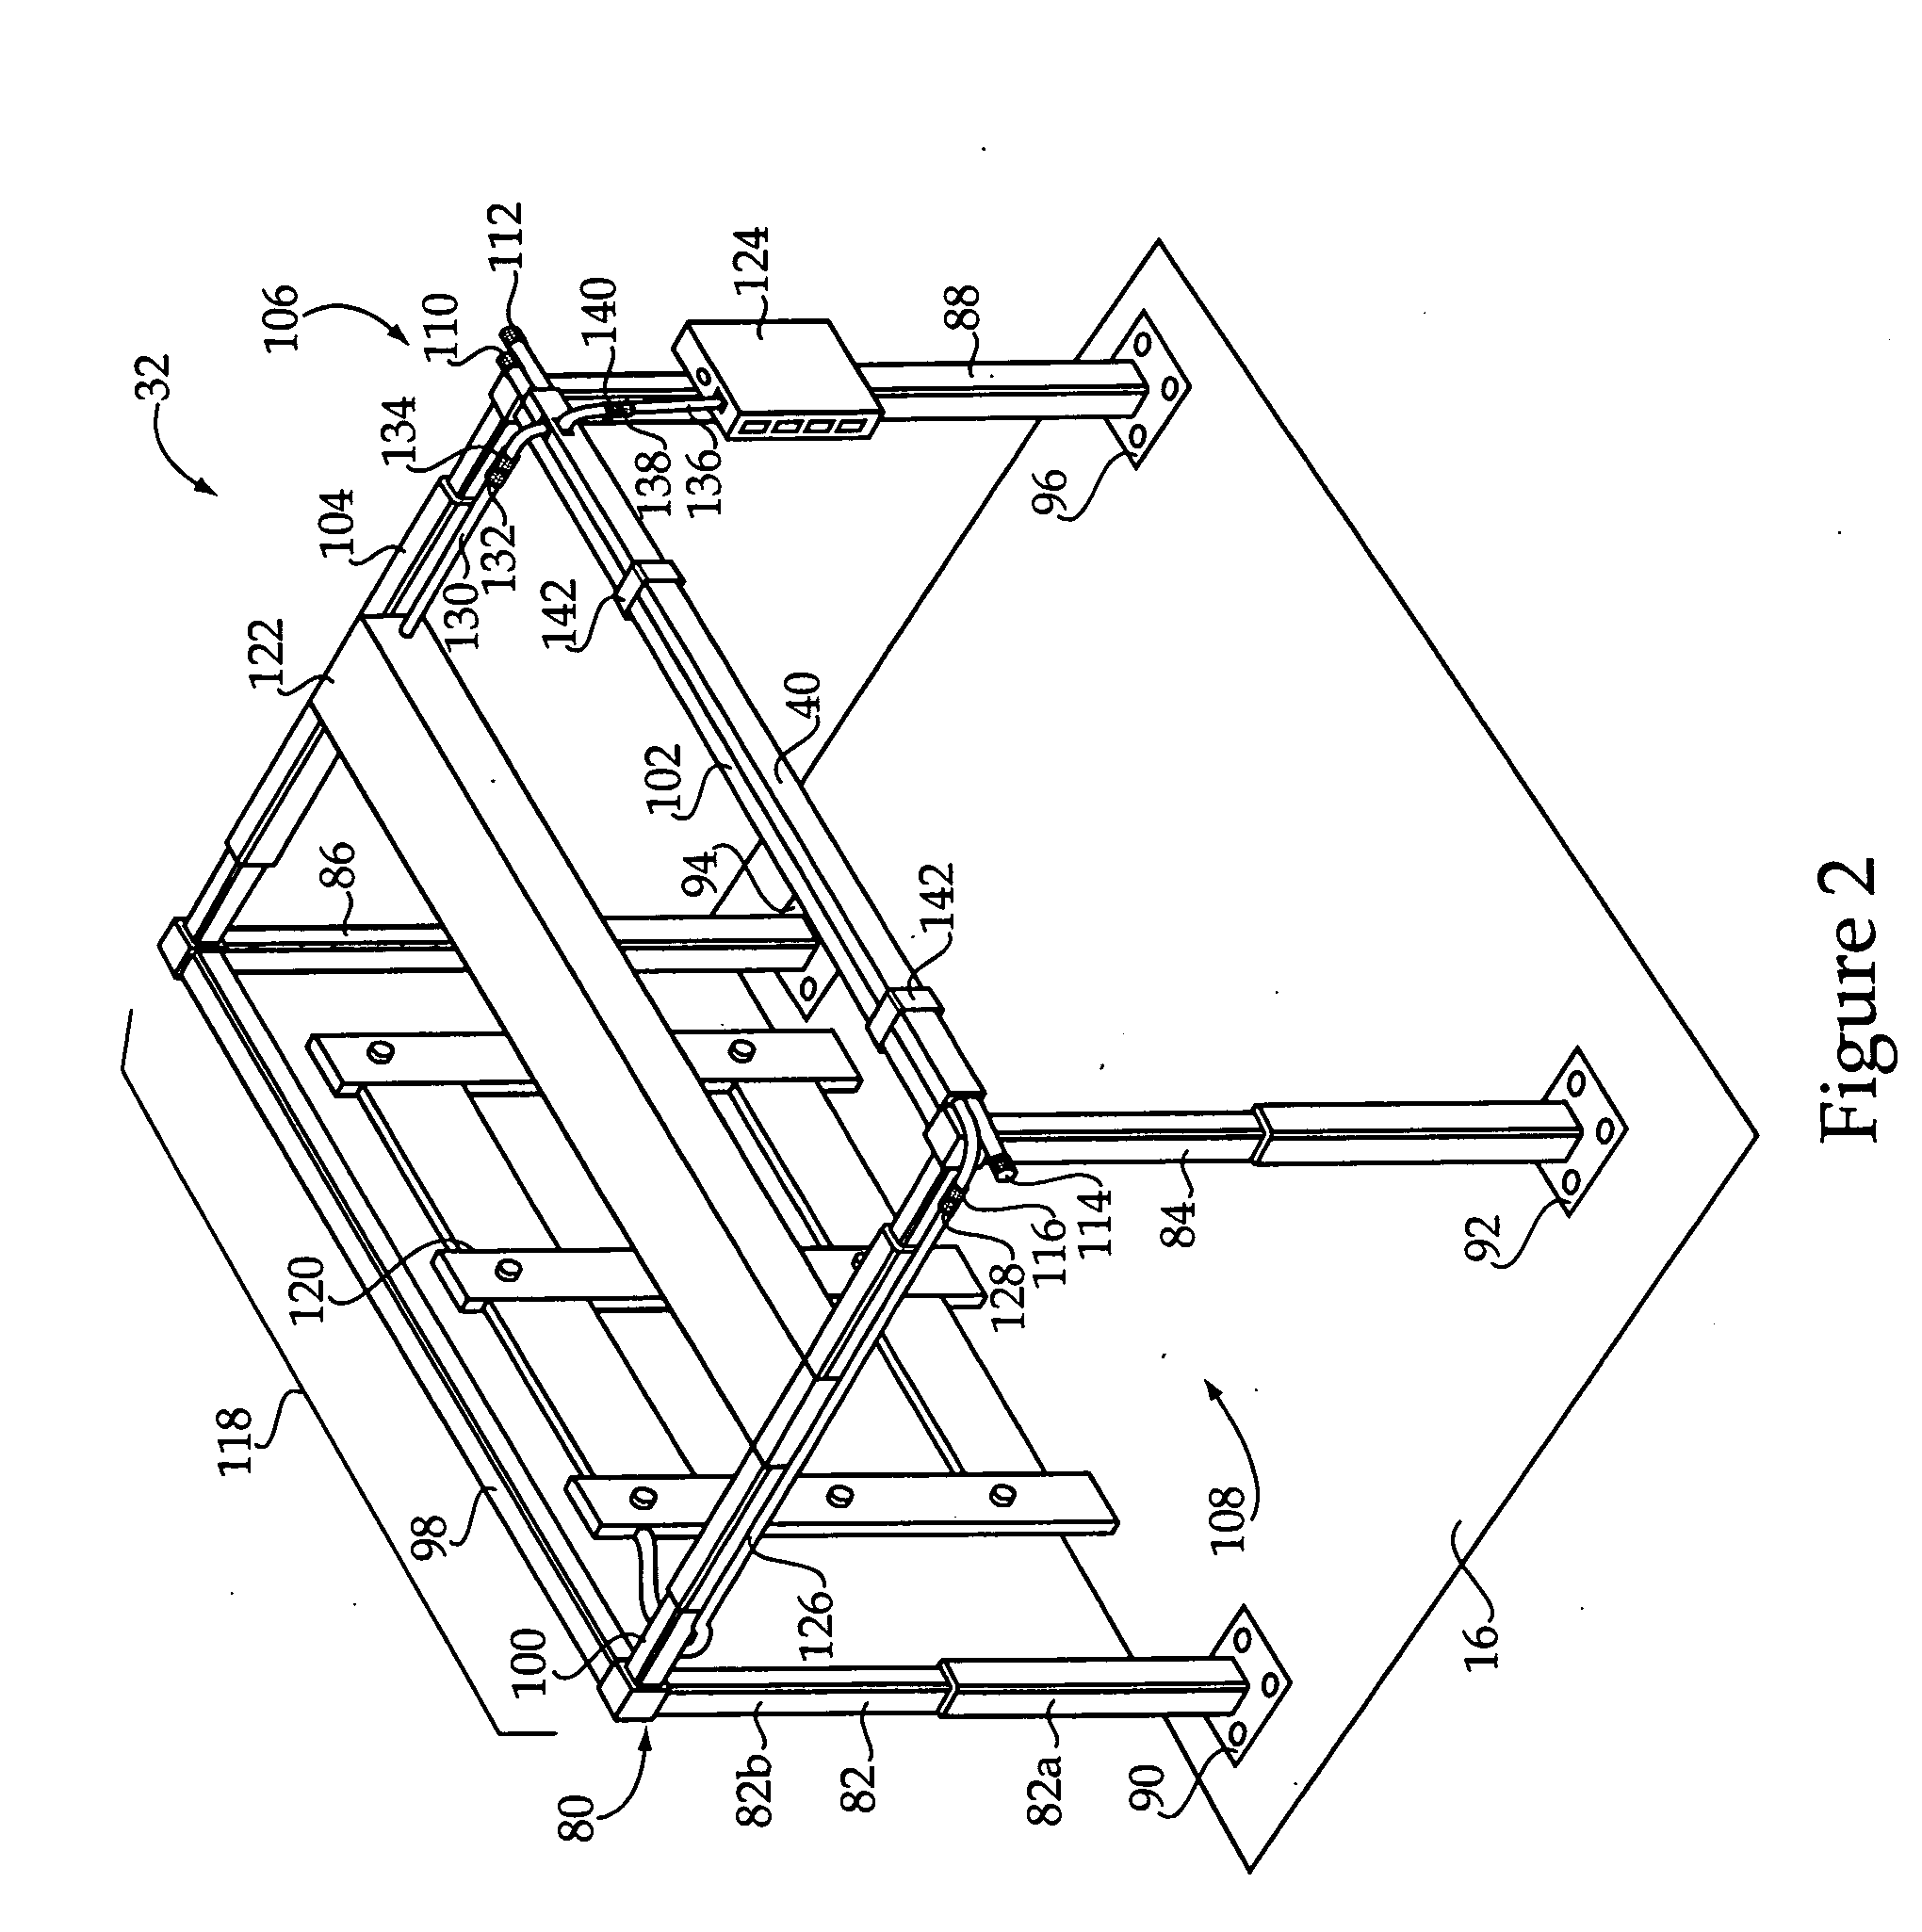 Modular manufacturing line including a buffer and methods of operation therefor